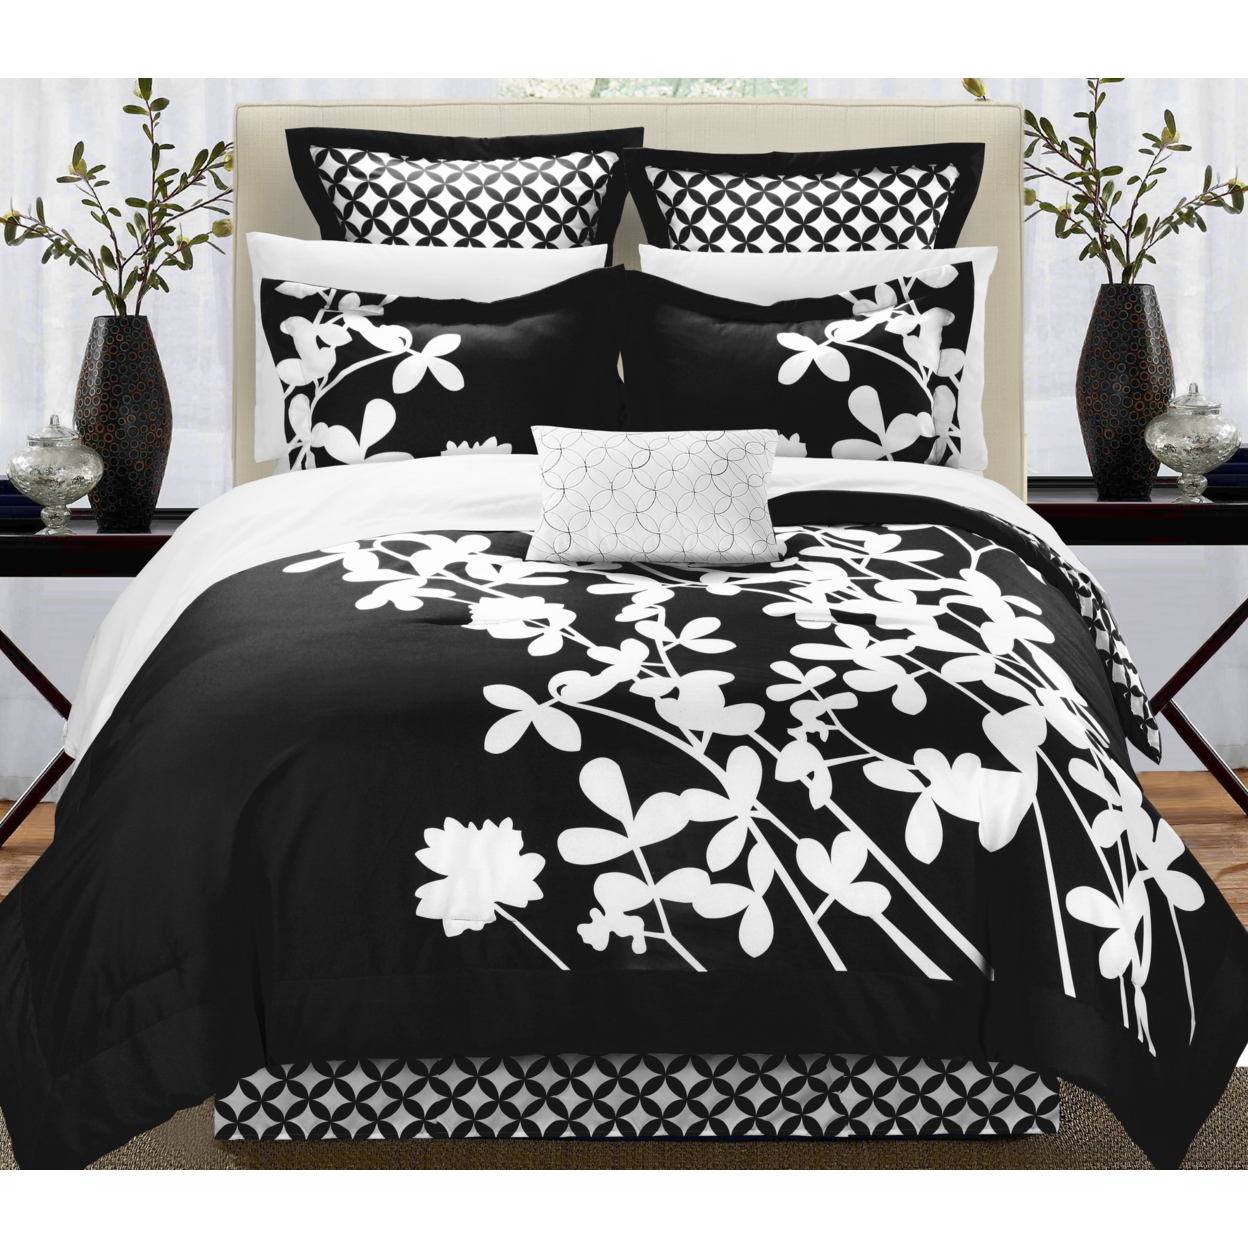 7 Piece Sire Reversible Large Scale Floral Design Printed With Diamond Pattern Reverse Comforter - Black, Queen